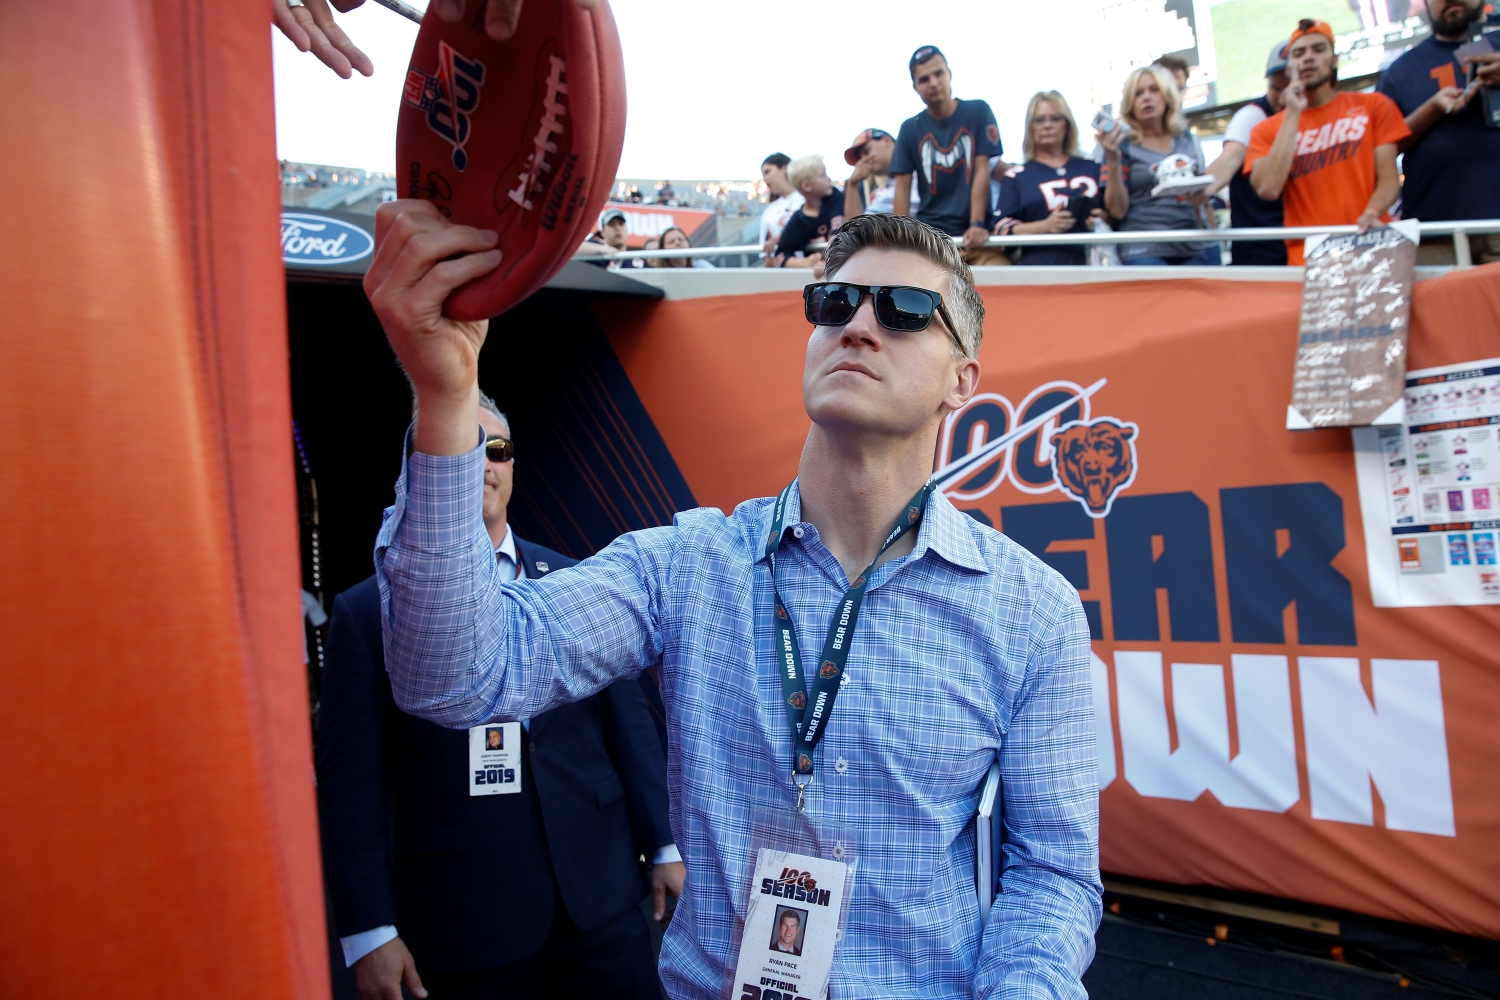 Ryan Pace hands an autographed football to a Chicago Bears fan.